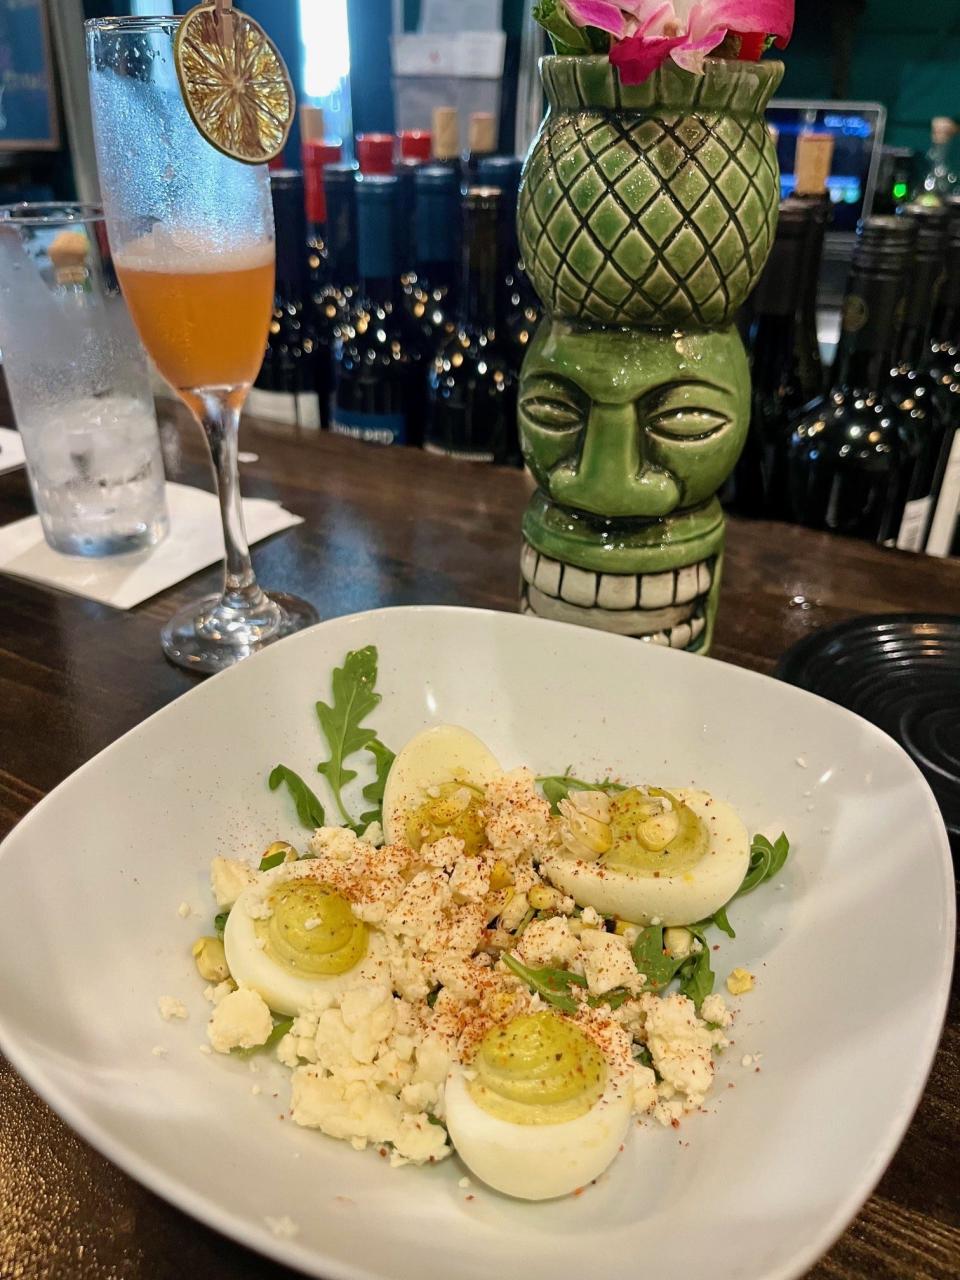 Street corn deviled eggs are on Front Porch Social's limited menu on New Year's Eve.